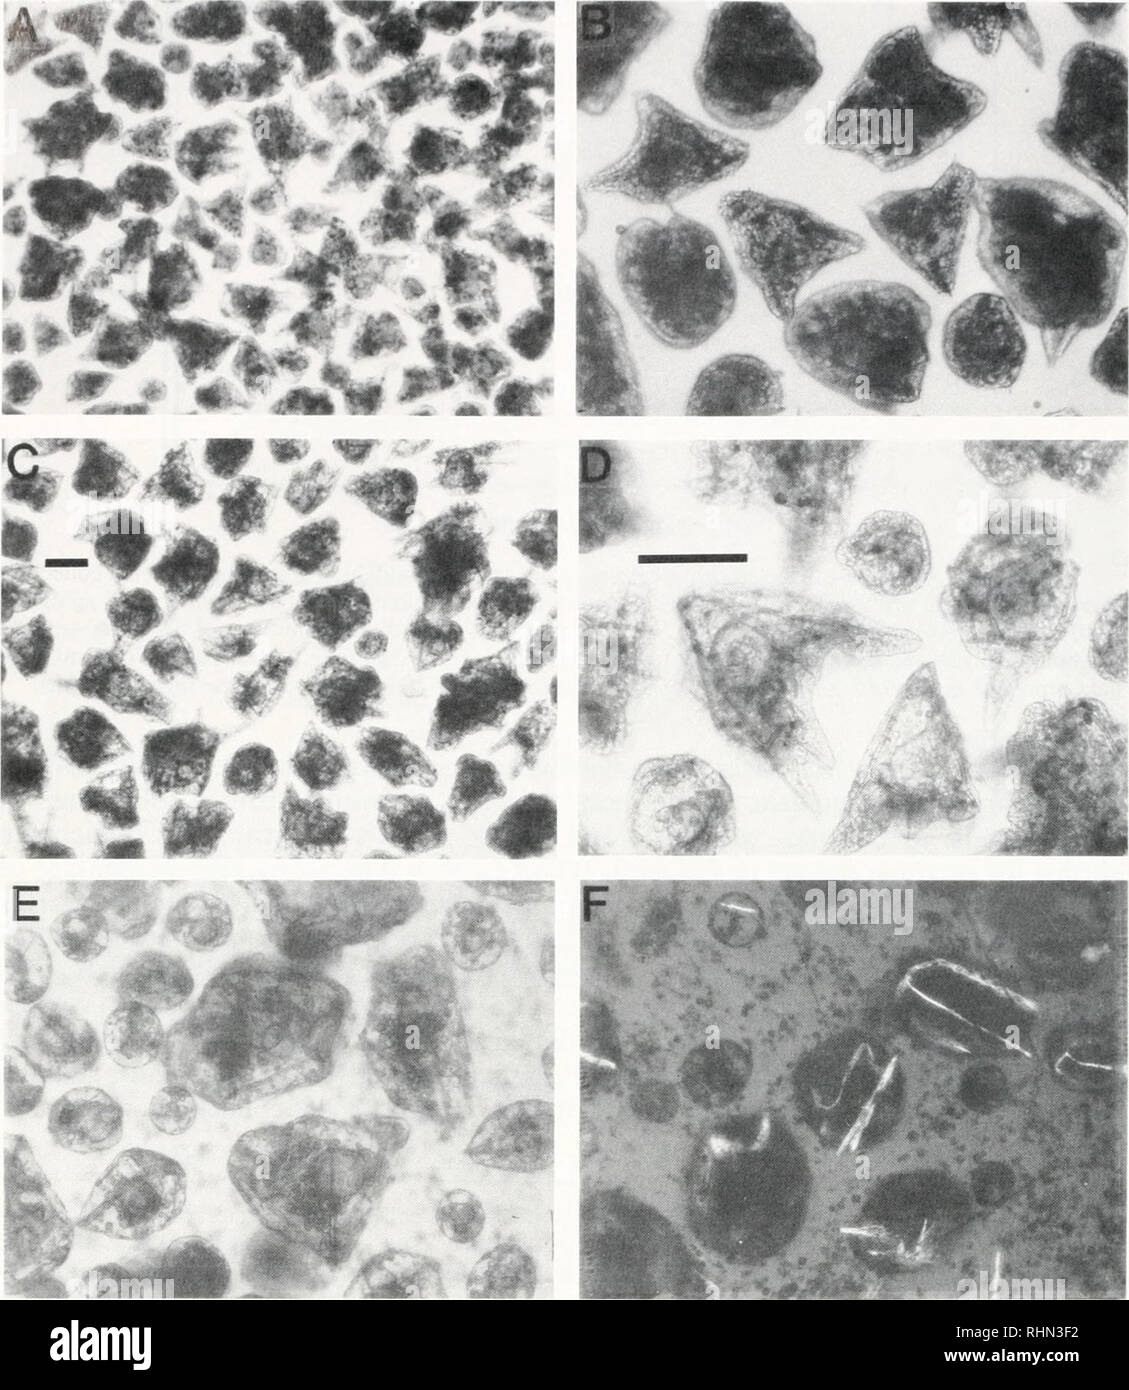 . The Biological bulletin. Biology; Zoology; Biology; Marine Biology. 68 E. G. SCHNEIDER ****. FIGURE 3. Differentiation of collecting aggregates into pluteus-like structures. A and B: .4. punctulata embryoids after incubation in ASW in stationary culture for two days at 20-22°C. C and D: L. variegatus embryoids after incubation in ASW in stationary culture for two days at 20-22°C. E and F: S. pitrpuratus embryoids after incubation in ASW in stationary culture for four days at 16.5°C. All photographs were taken with the aid of a Wild-Heerbrugg phase contrast microscope with a Polaroid camera a Stock Photo